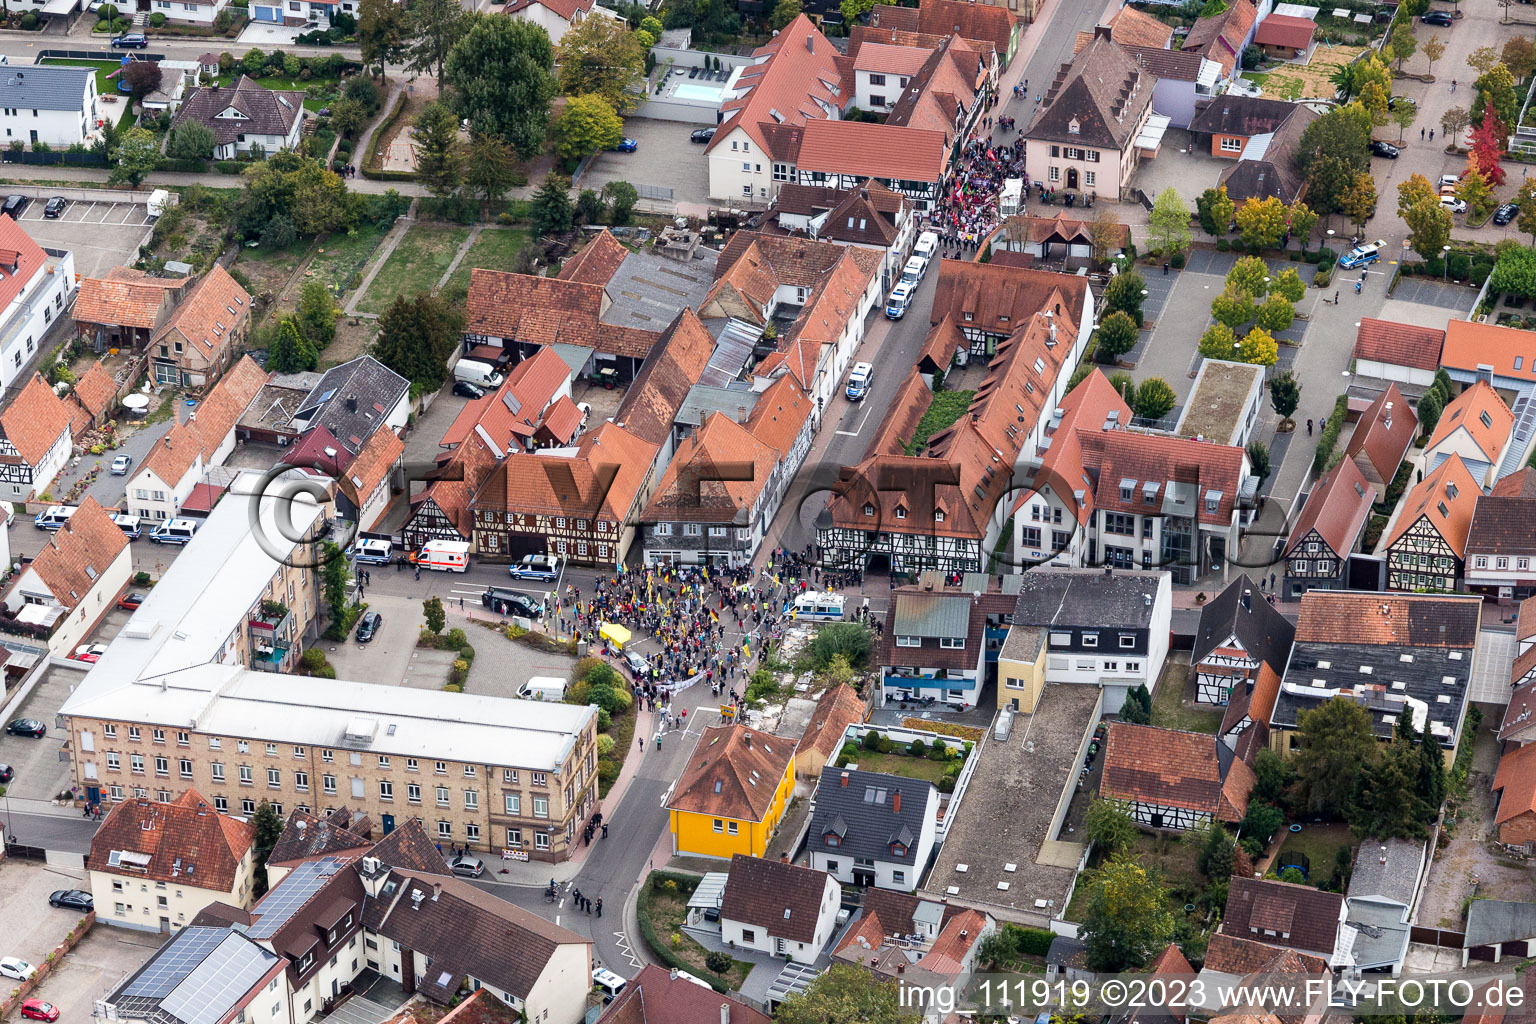 Aerial photograpy of Demo “Women’s Alliance Kandel” vs. “AntiFa/We are Kandel/Grandmas against the right in Kandel in the state Rhineland-Palatinate, Germany